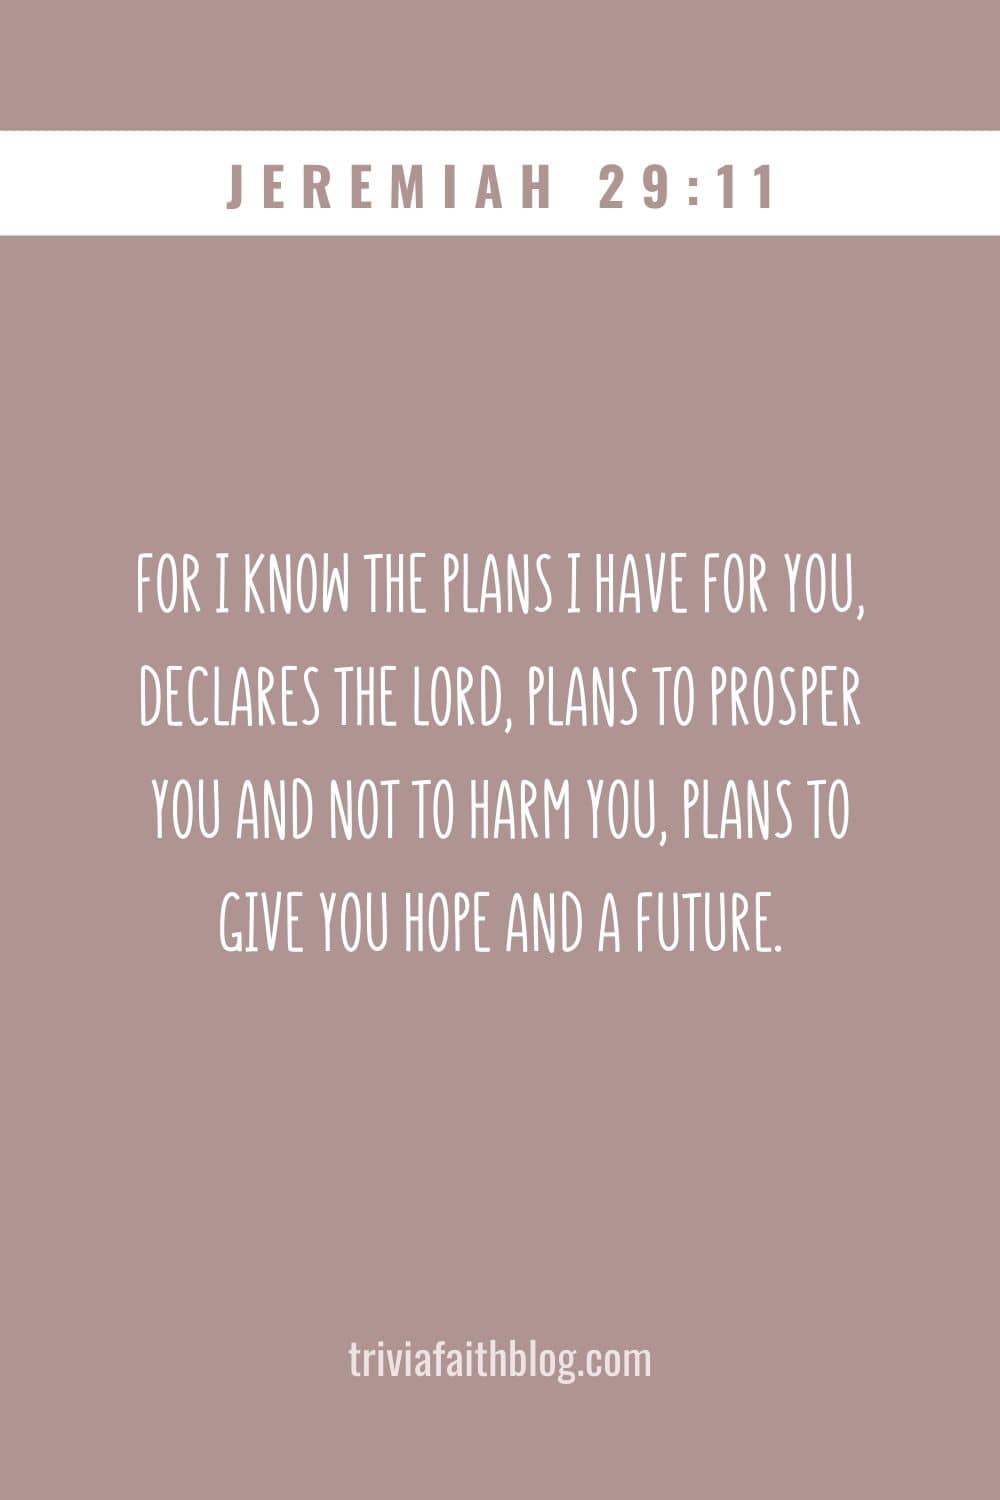 For I know the plans I have for you, declares the Lord, plans to prosper you and not to harm you, plans to give you hope and a future